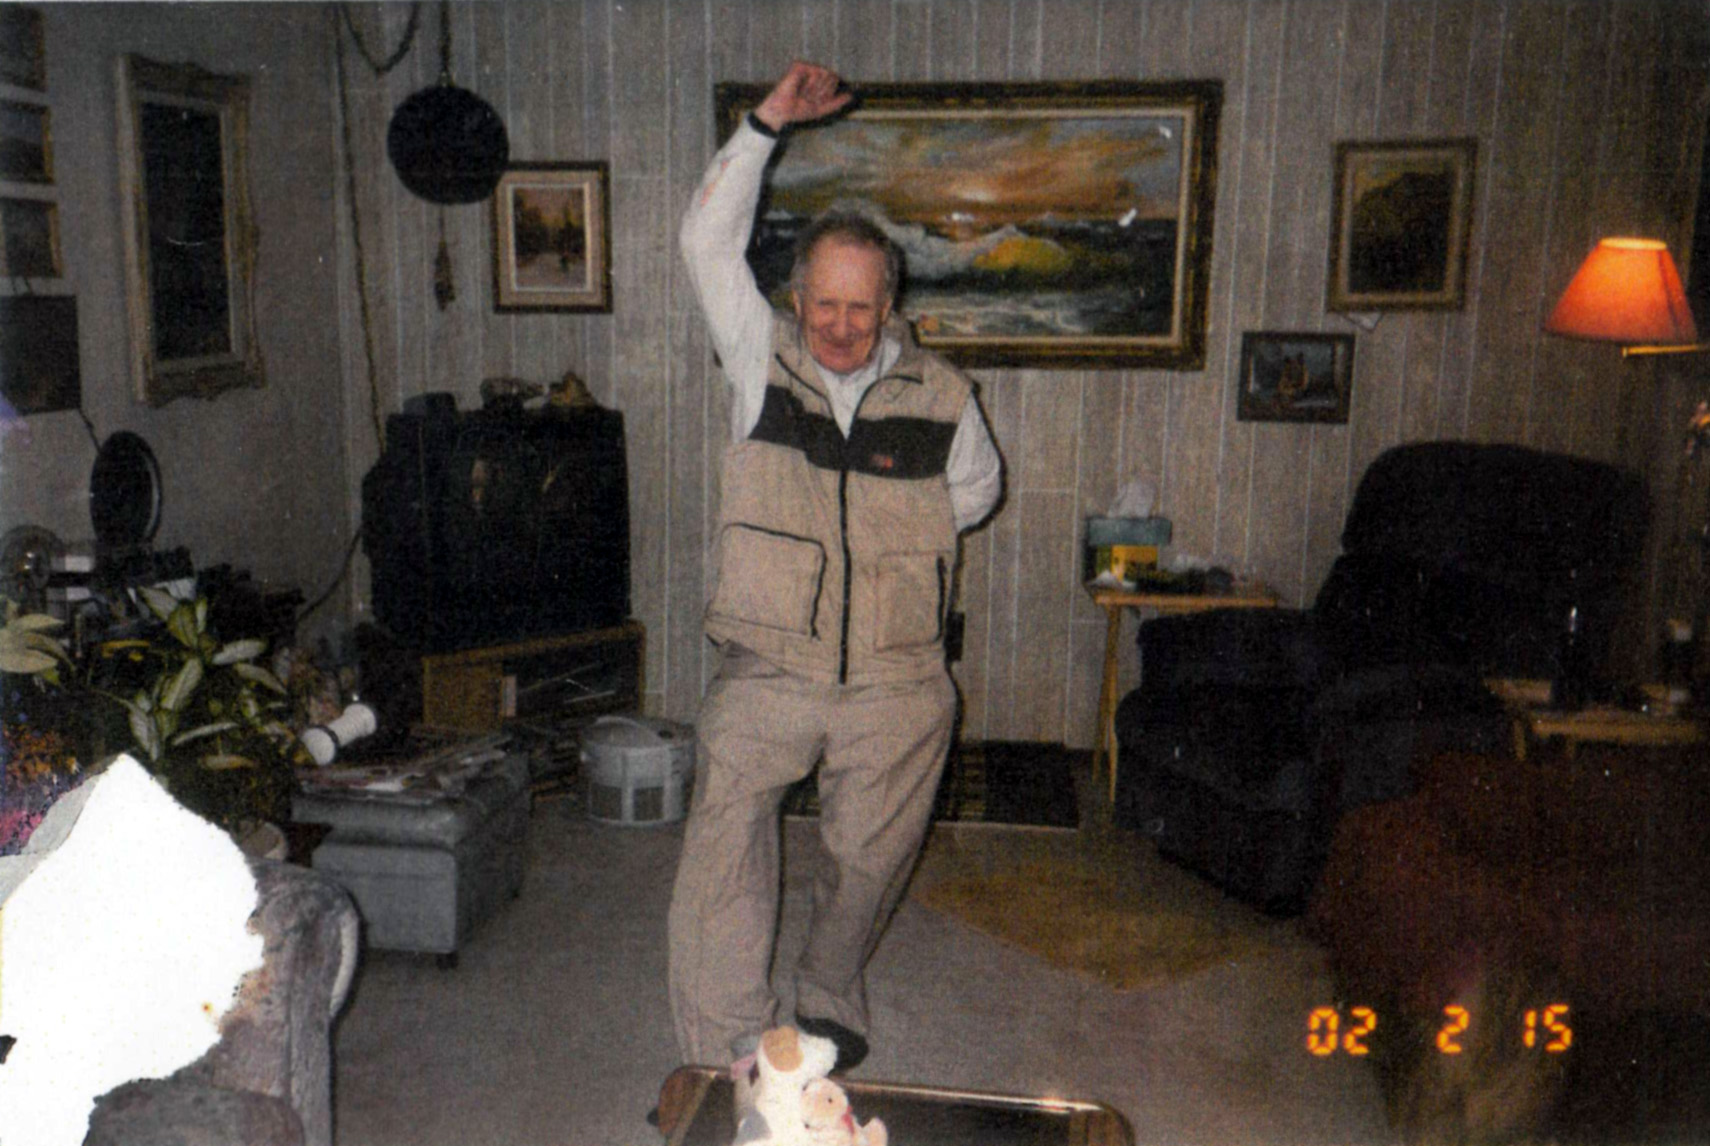 Max Juby dancing at the home of Geologist John Lill, in Toronto